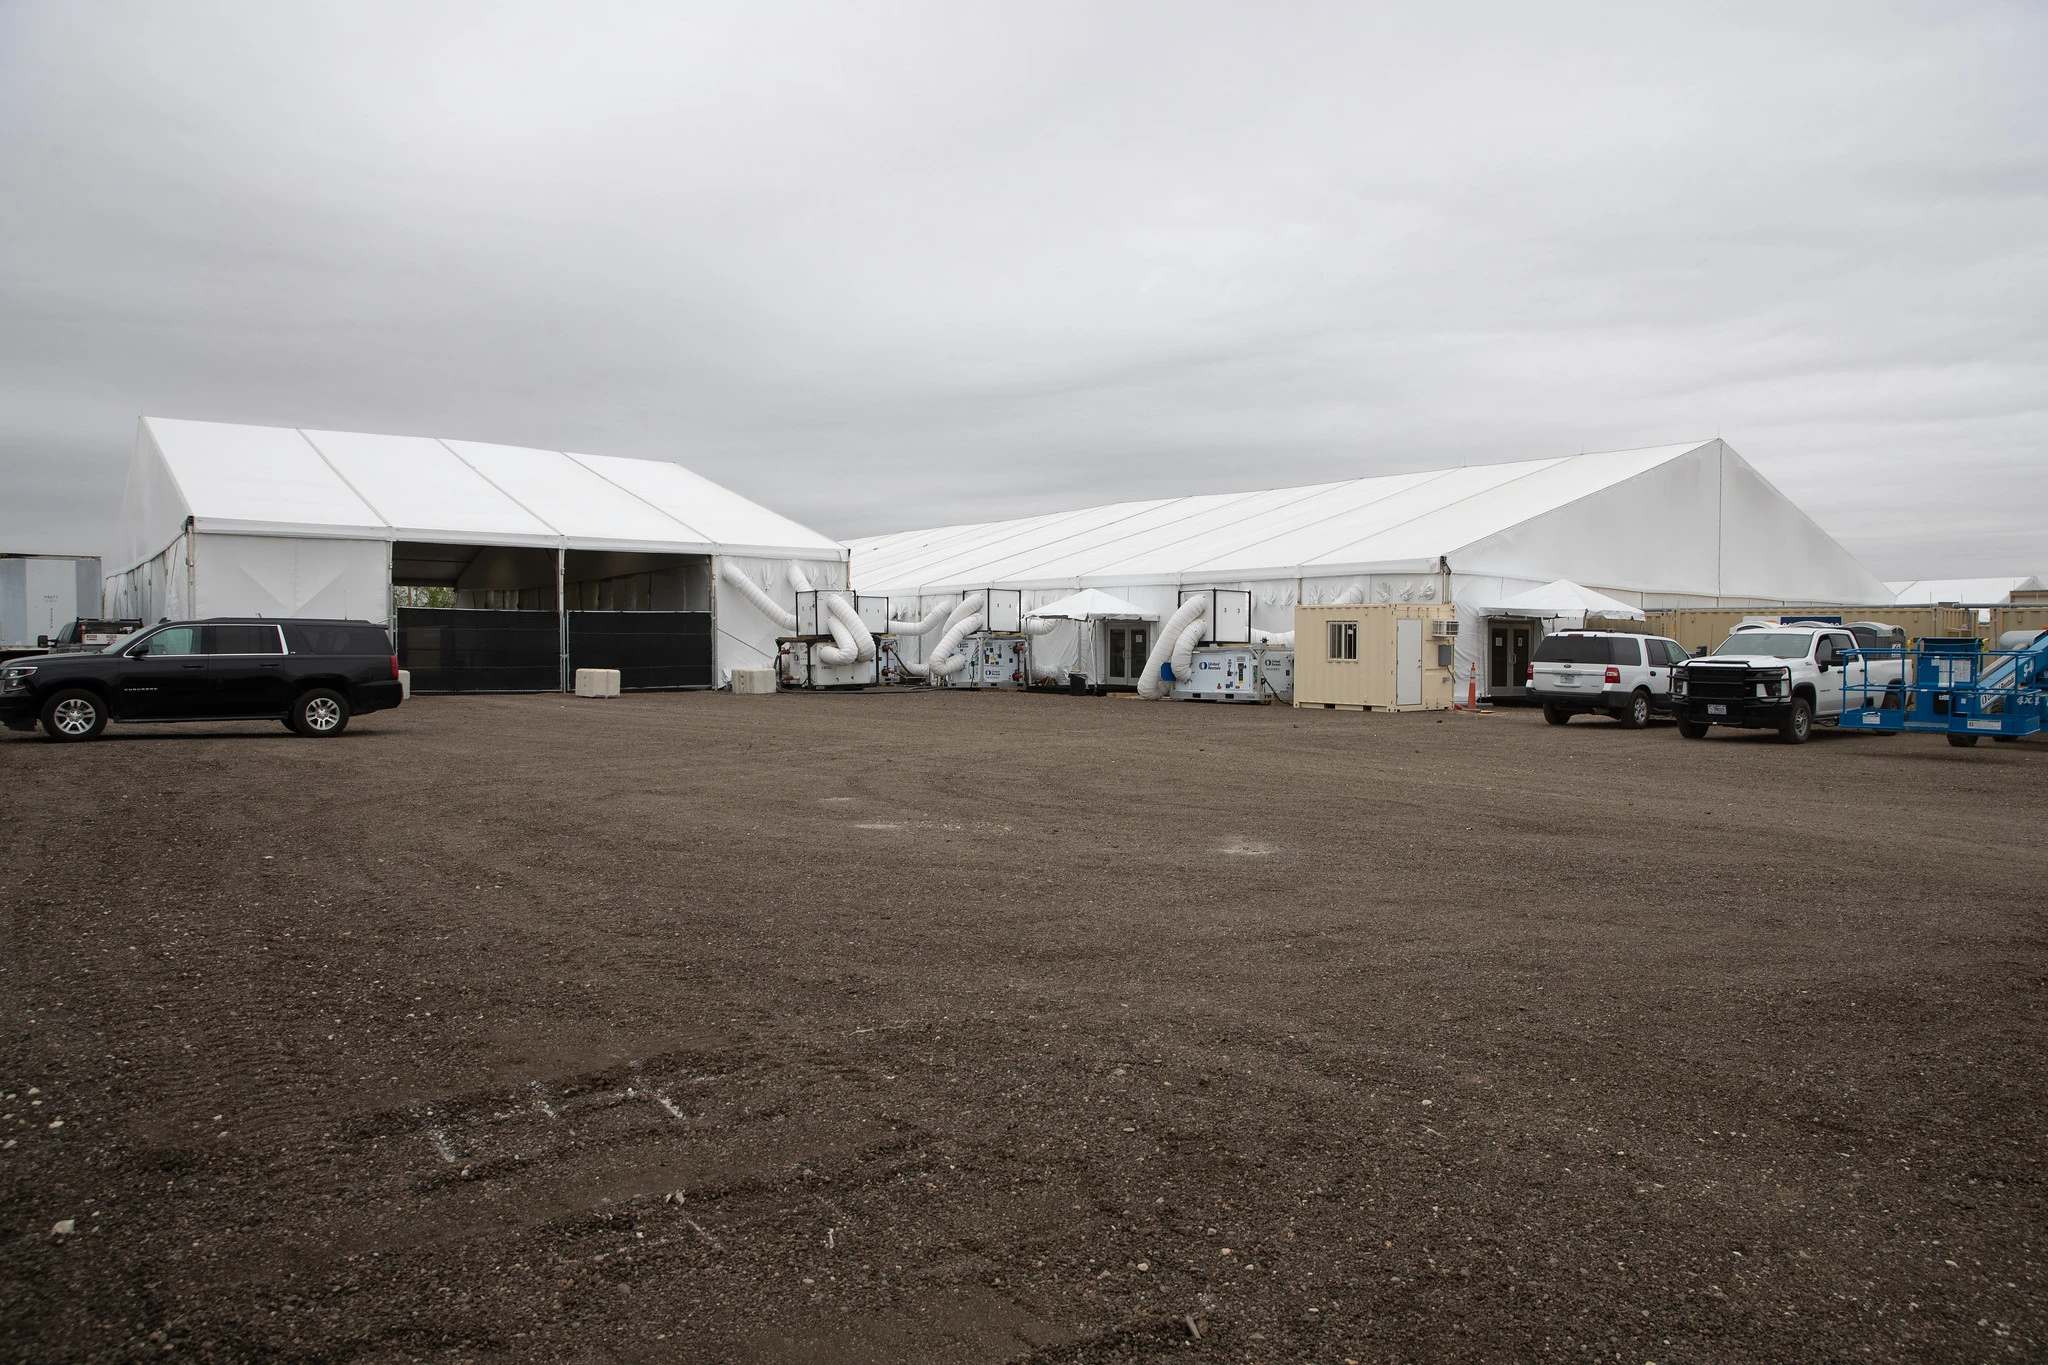 Eagle Pass tents for migrants